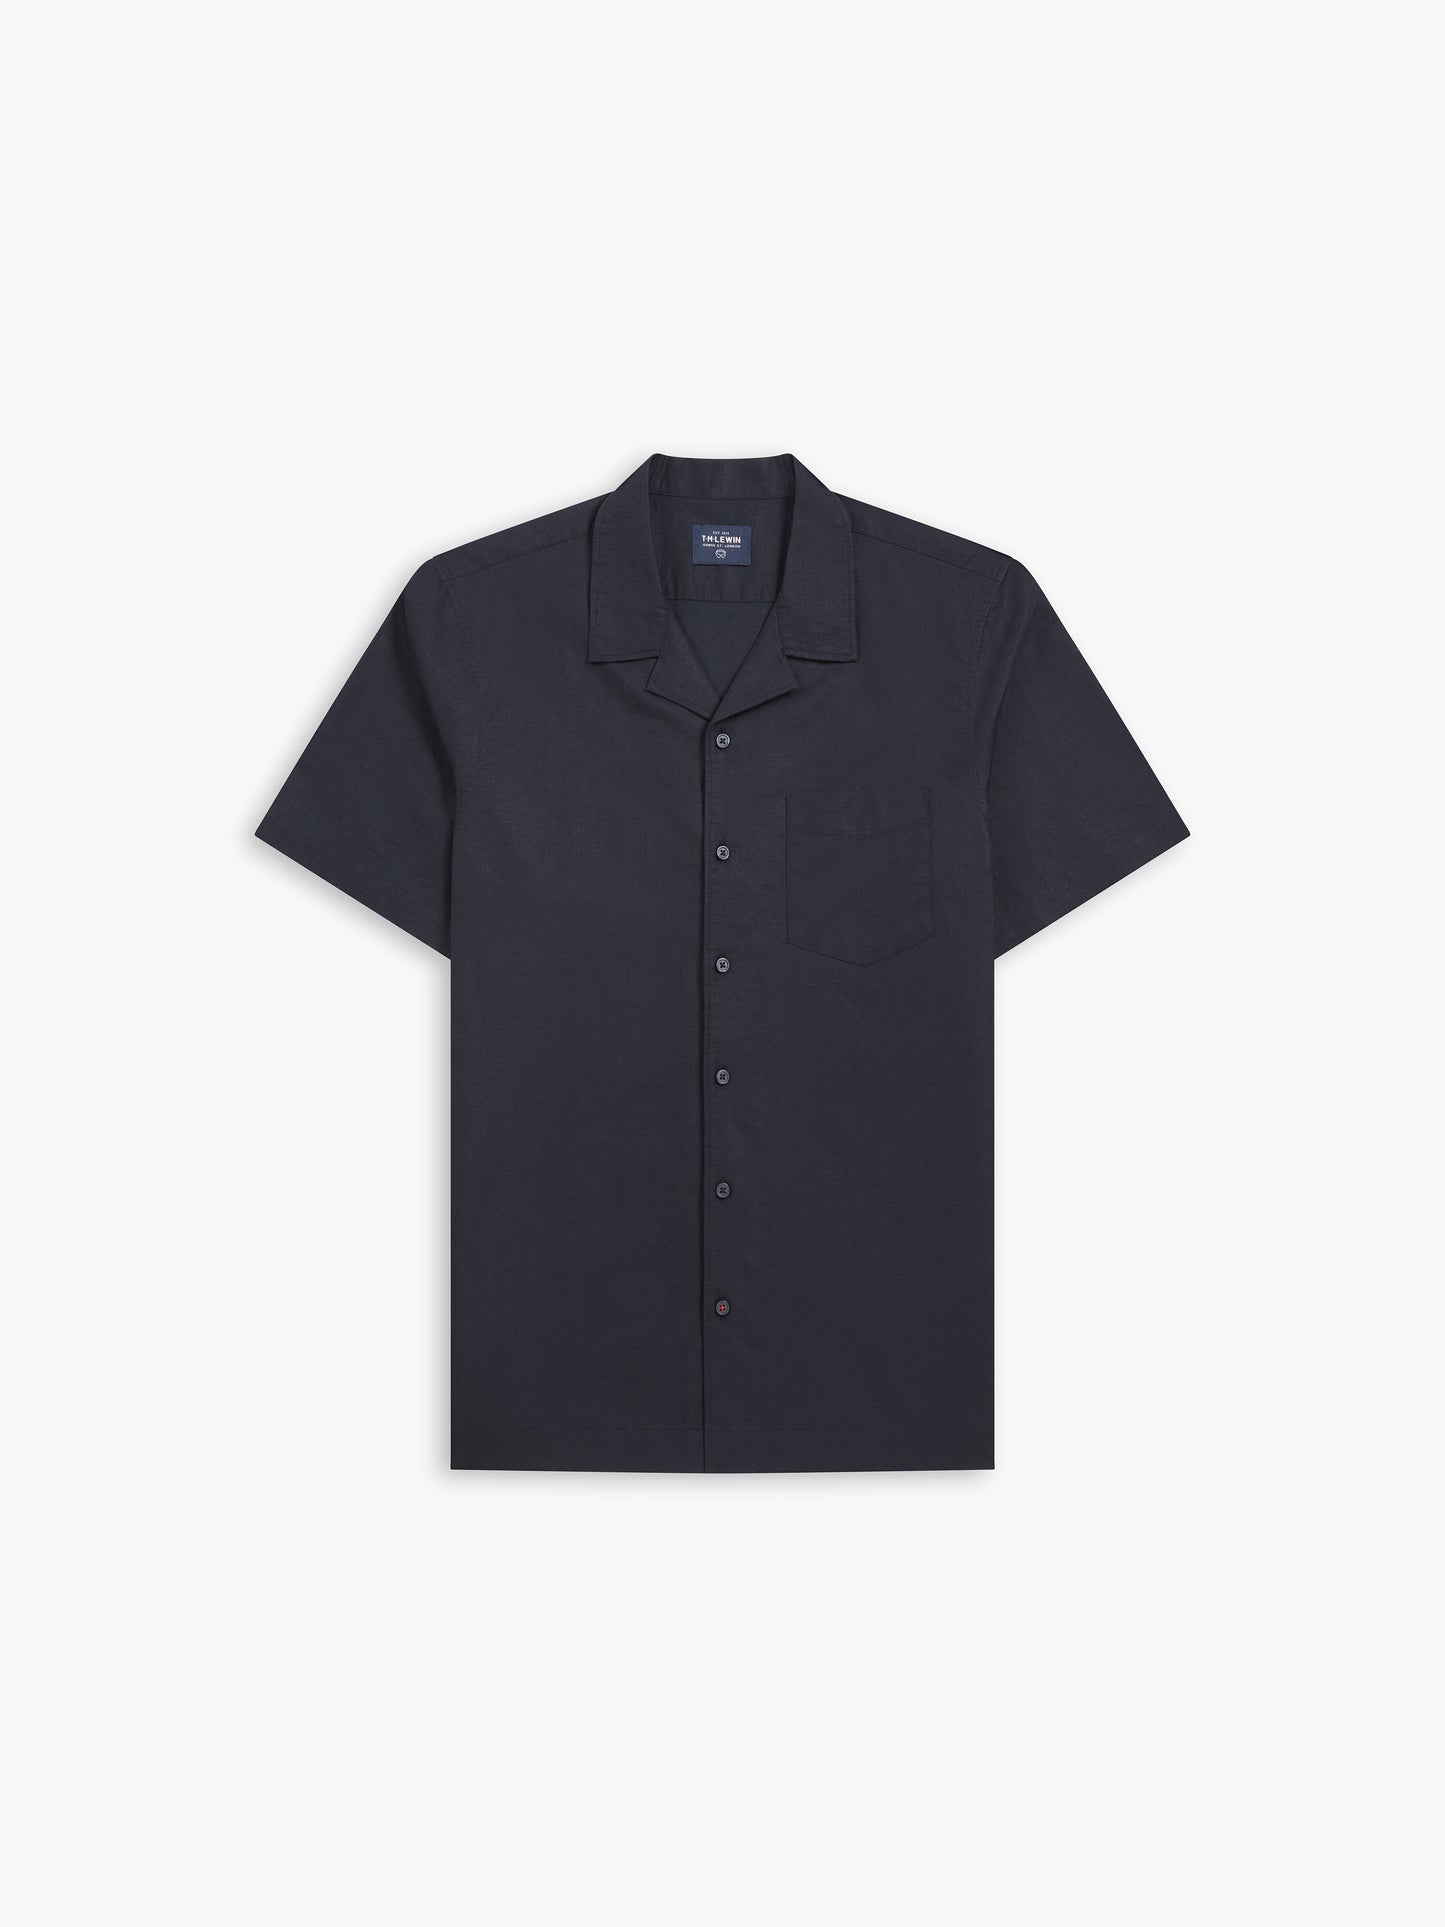 Image 1 of Navy Blue Linen Casual Shirt